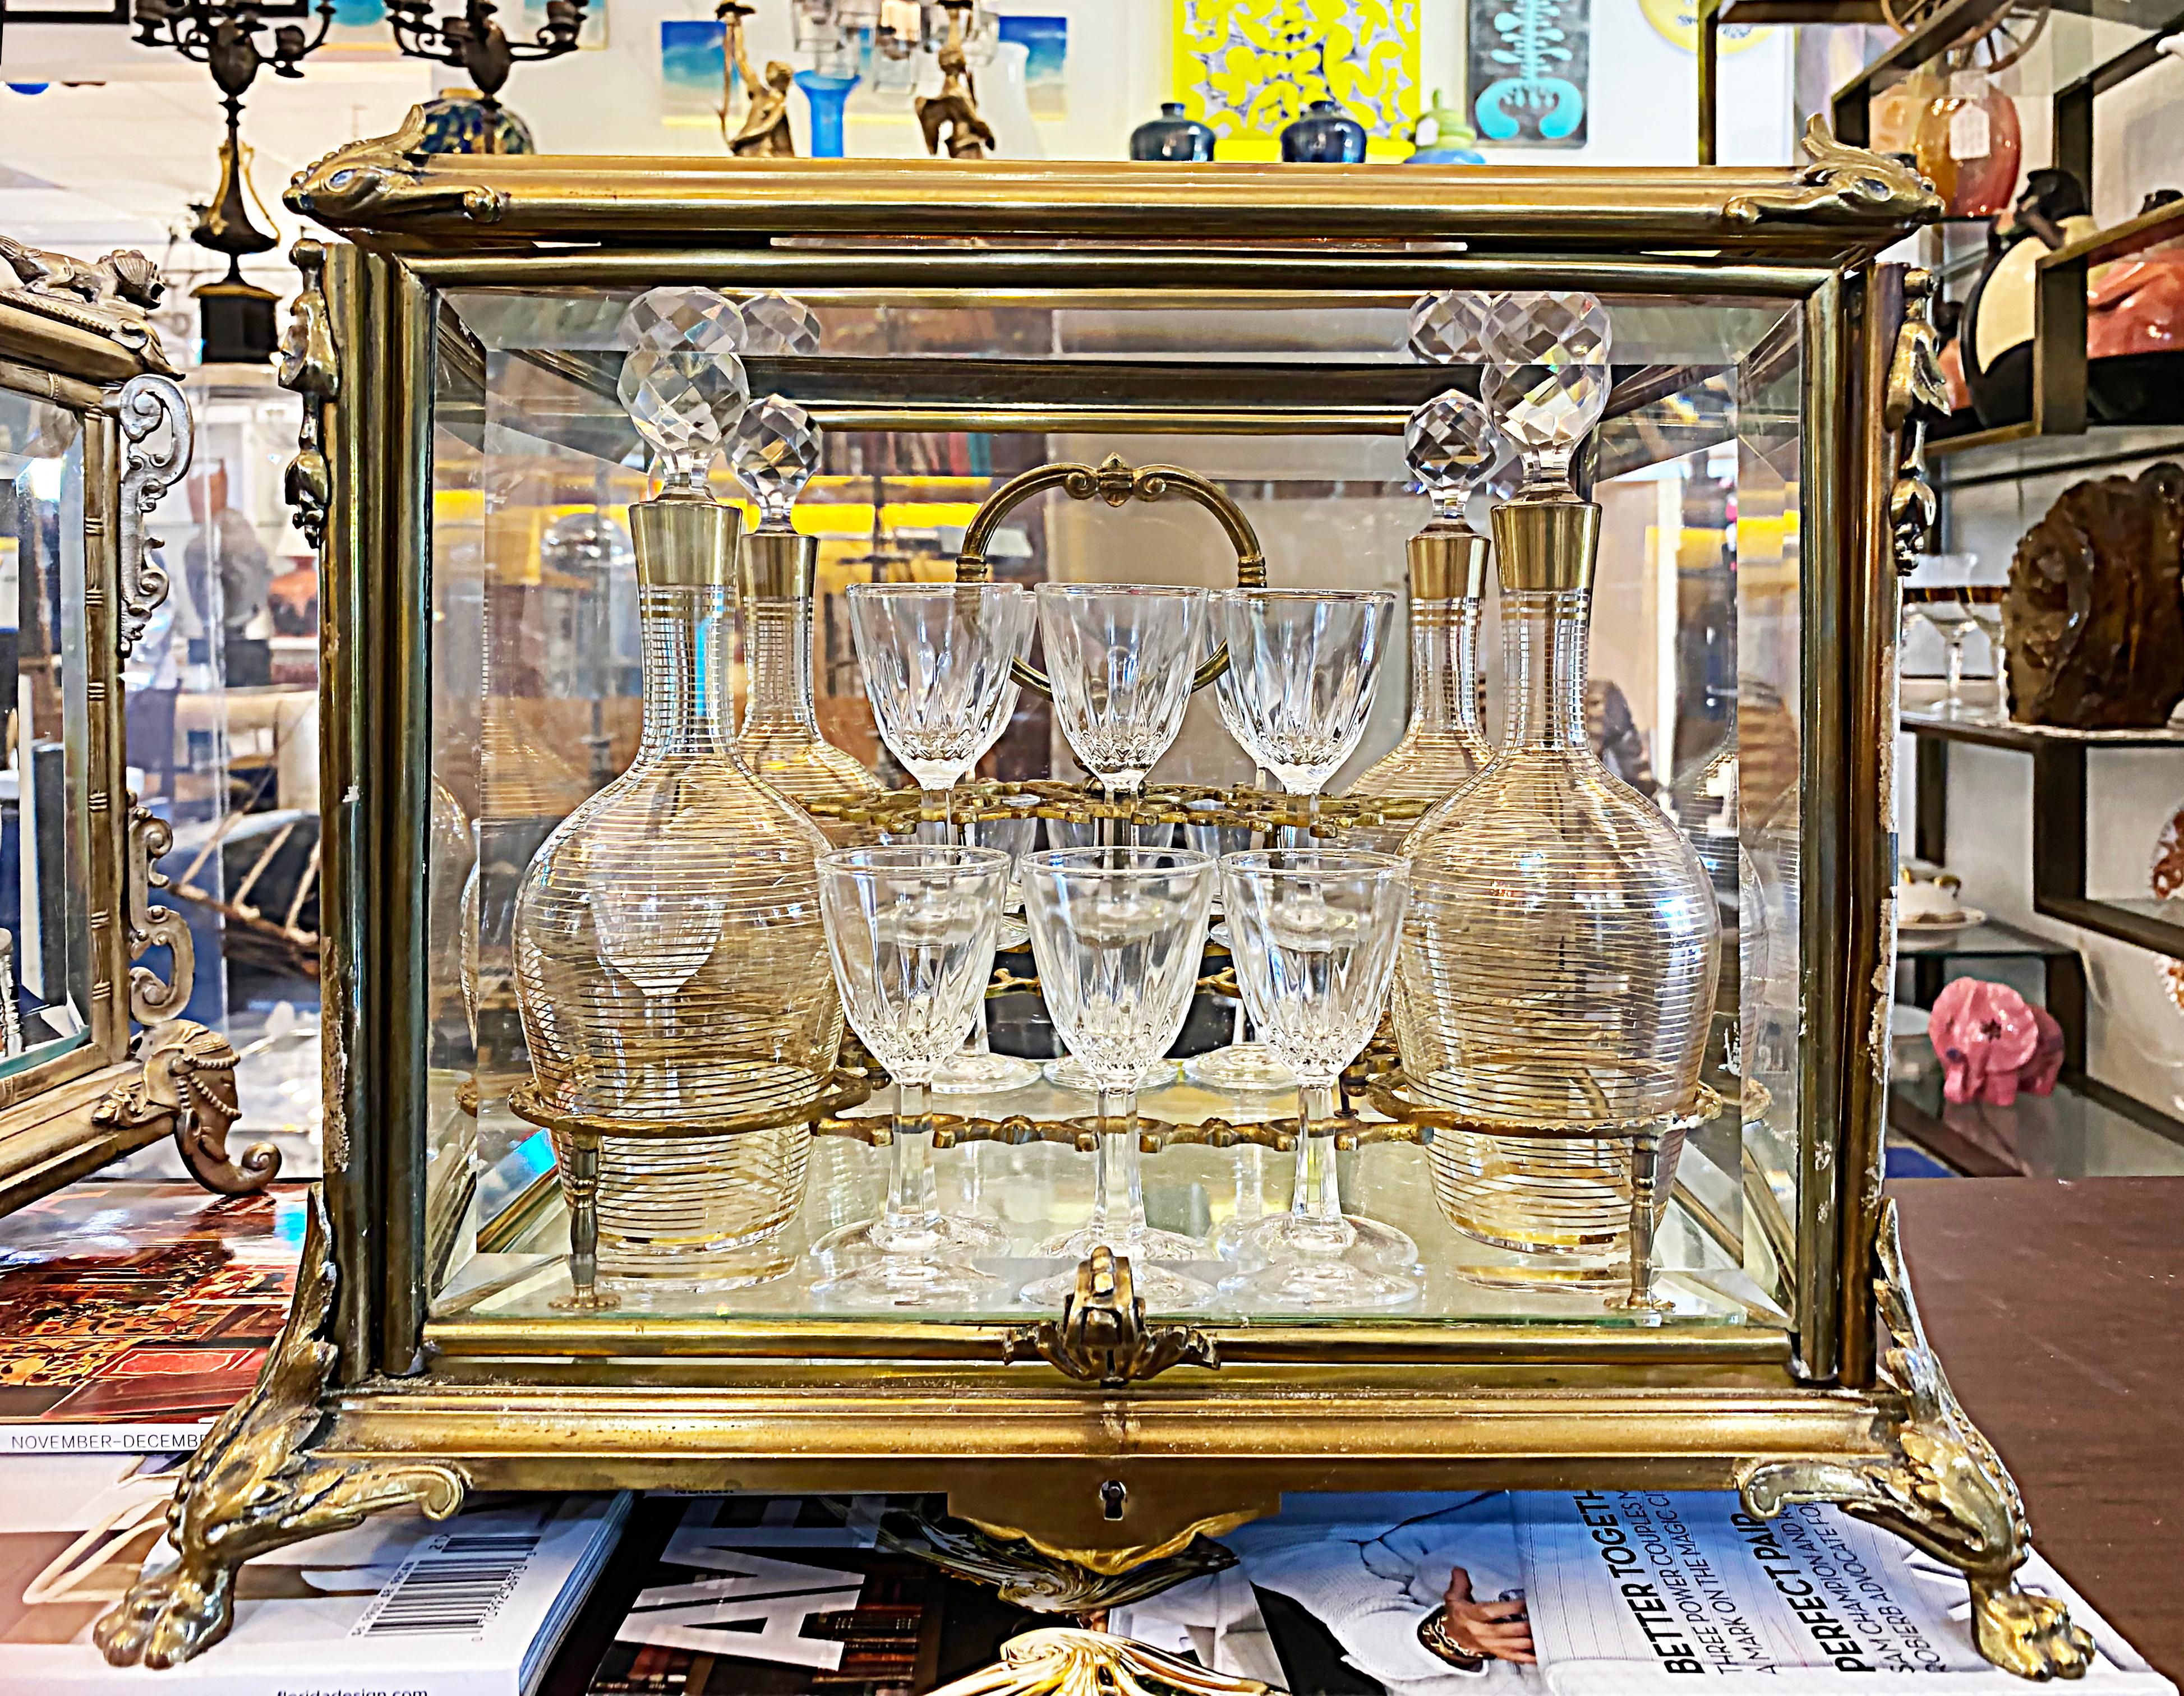 French Louis XVI Style Gilt Bronze Tantalus and Glassware Set, Late 19th Century

Offered for sale is a French Louis XVI style gilt bronze tantalus and glassware set dating from the late 19th century. This wonderful, decorative barware set has a